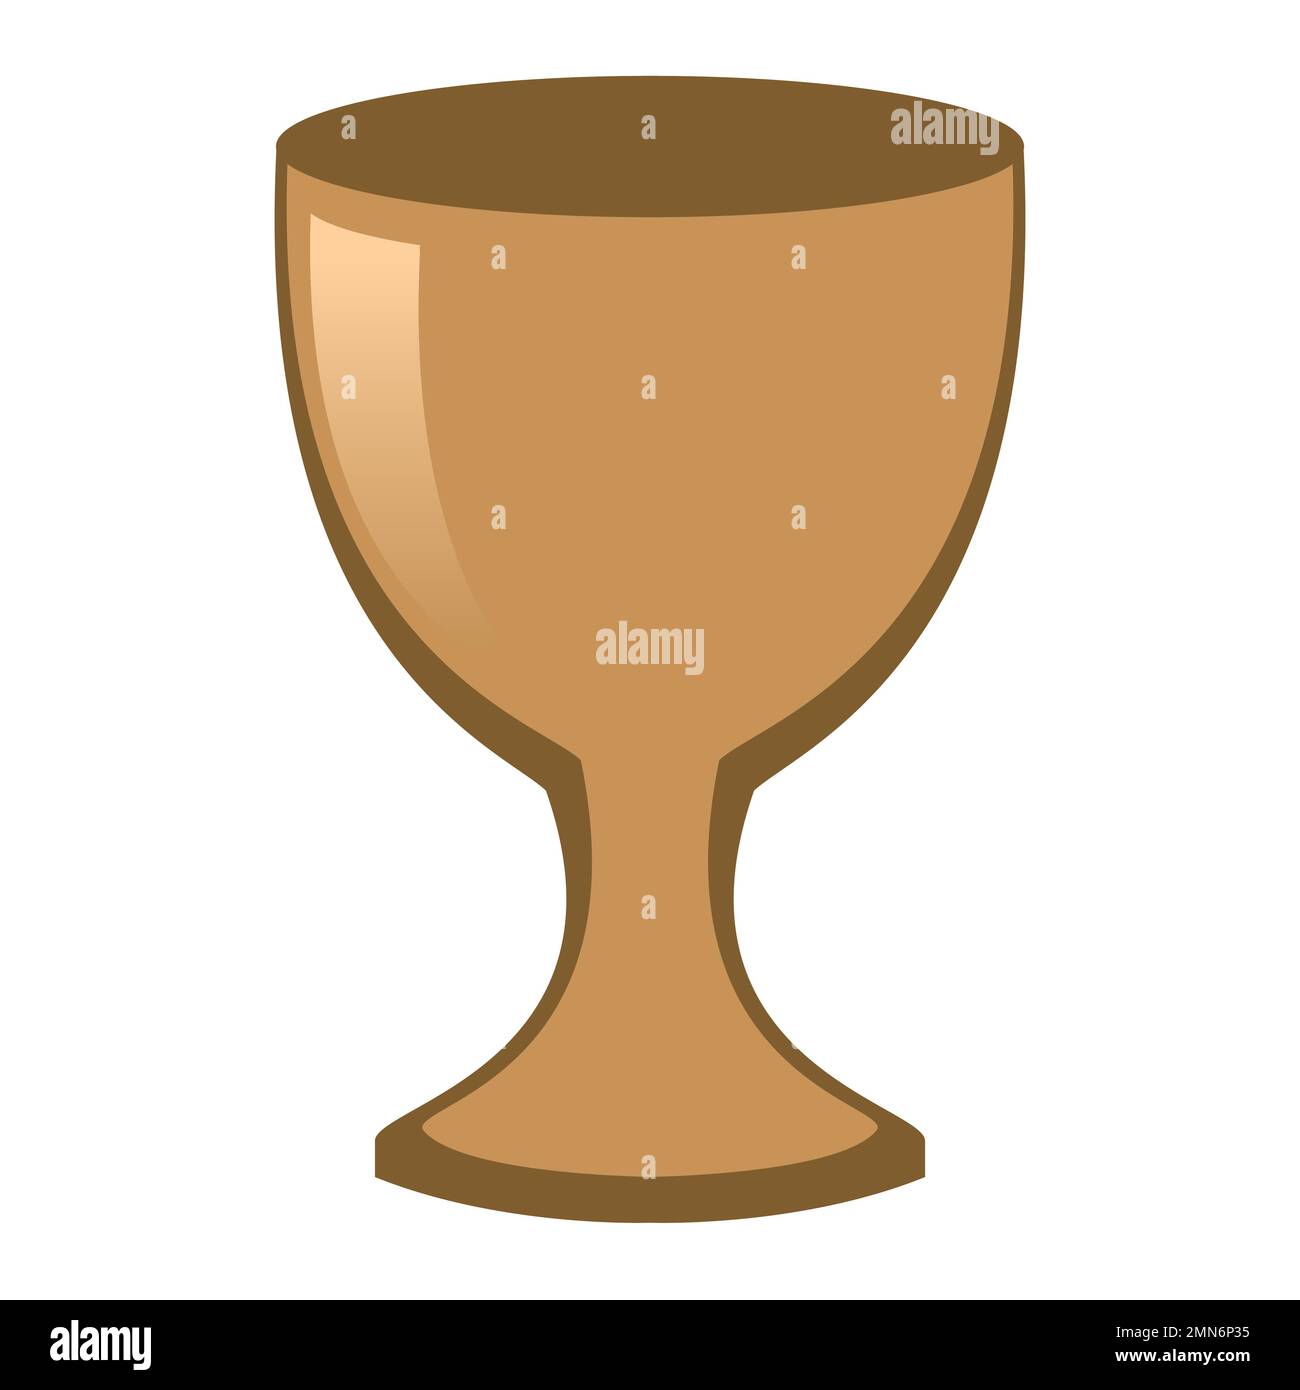 chalice, color vector illustration of a cup, white background Stock Vector